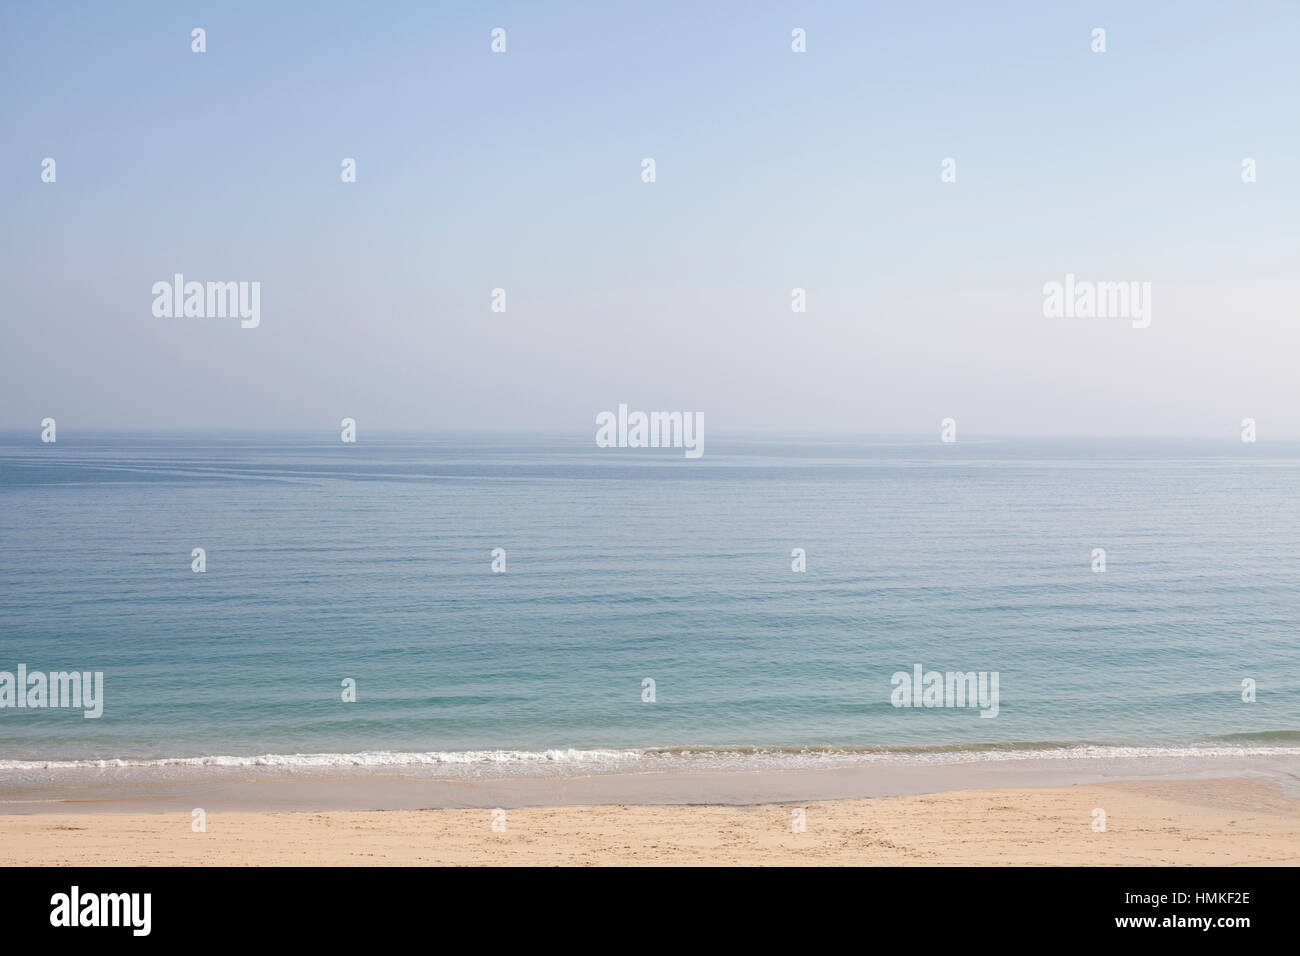 Calm sea and blue sky with small waves breaking on a sandy beach Stock Photo